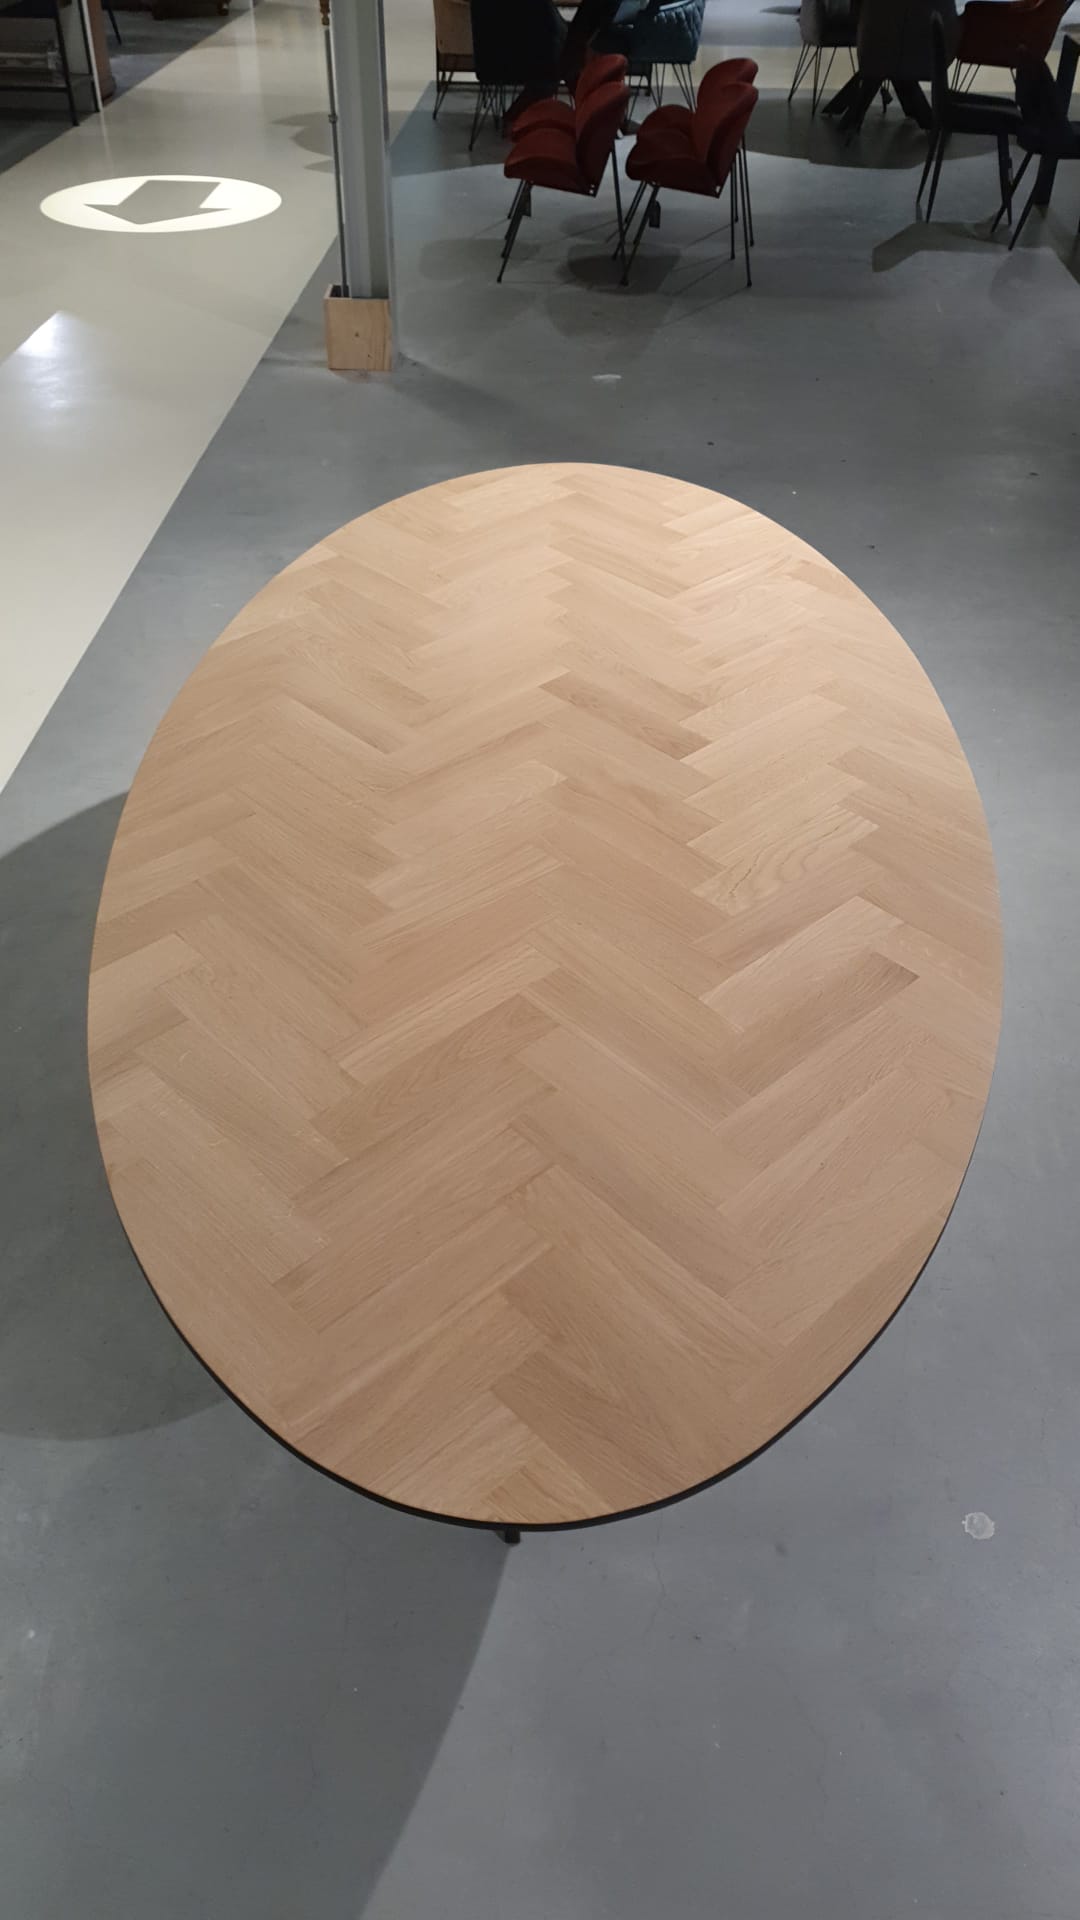 Trp Post Container Data Trp Post ID 39889 Oak Oval Herringbone Table Milin L Trp Post Container